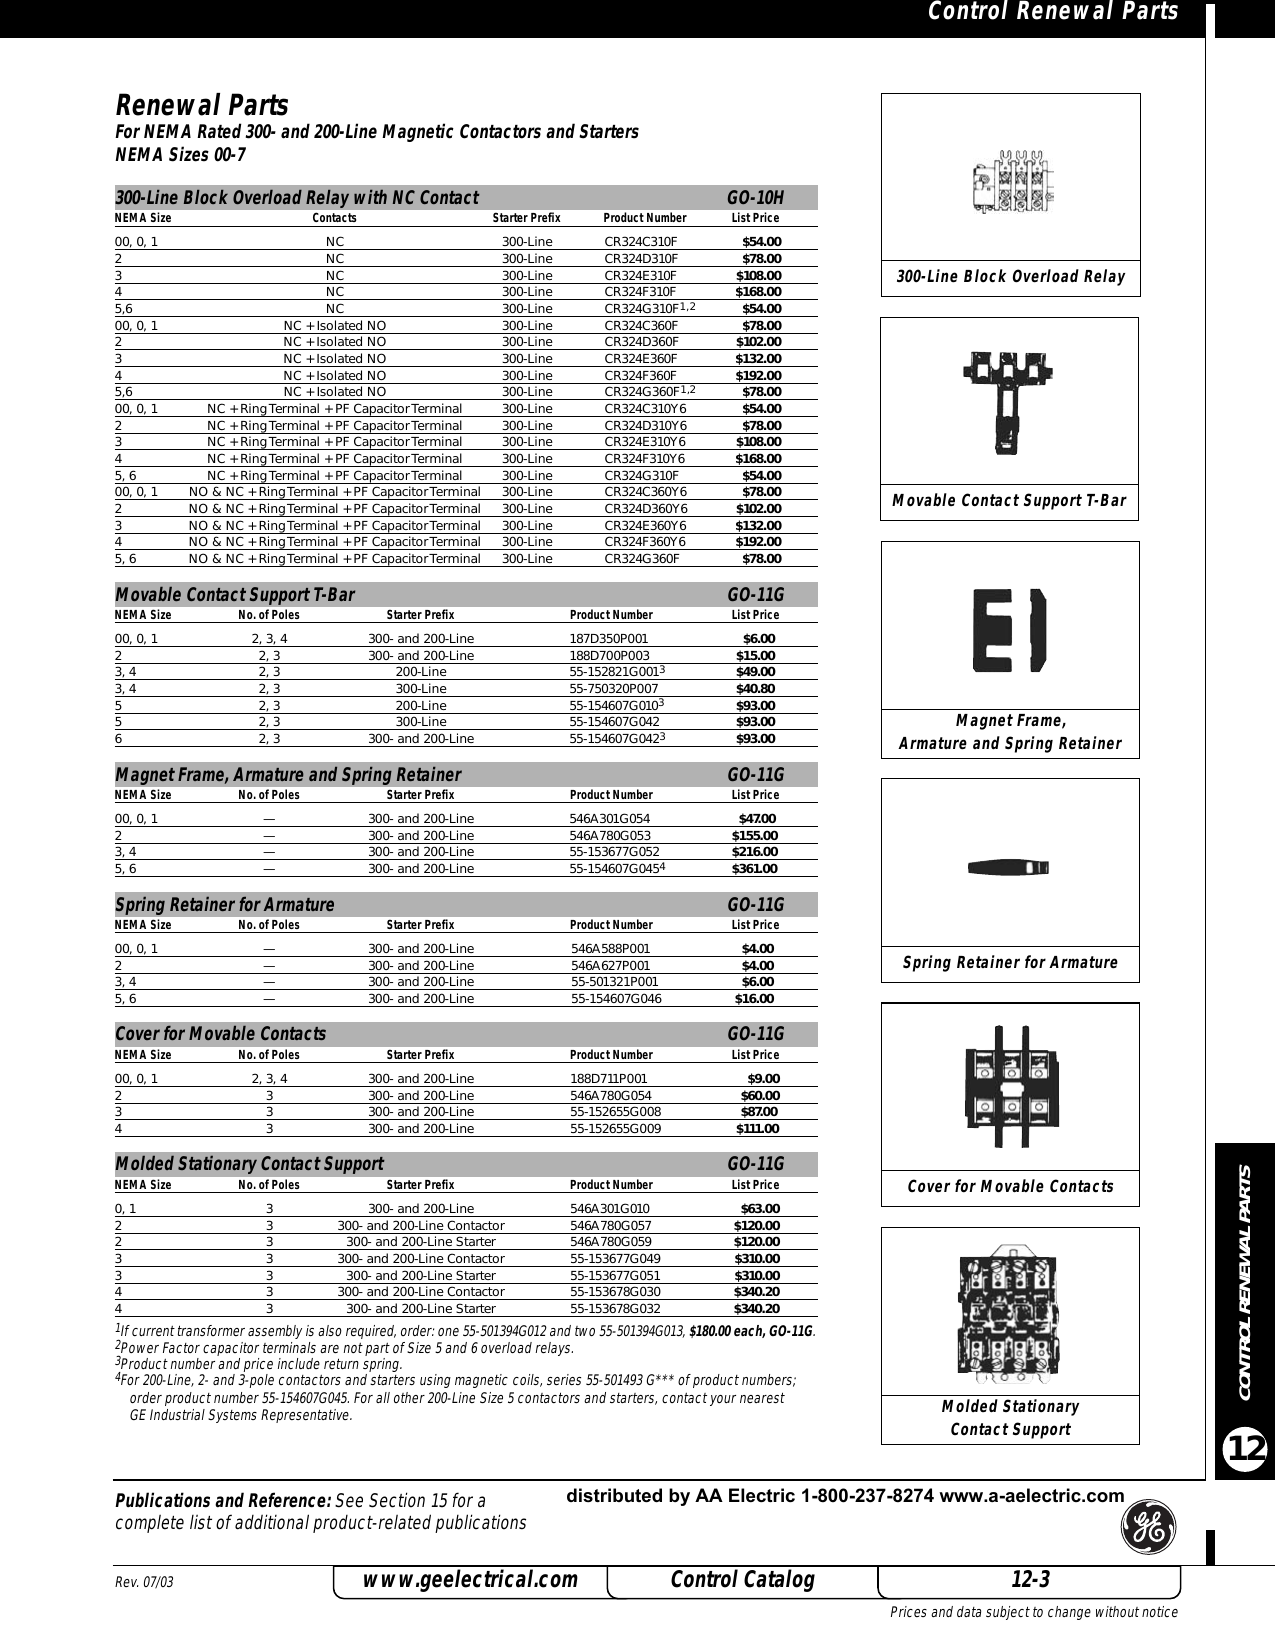 Page 3 of 8 - GE 2005 Control Catalog - Section 12  522426-Catalog